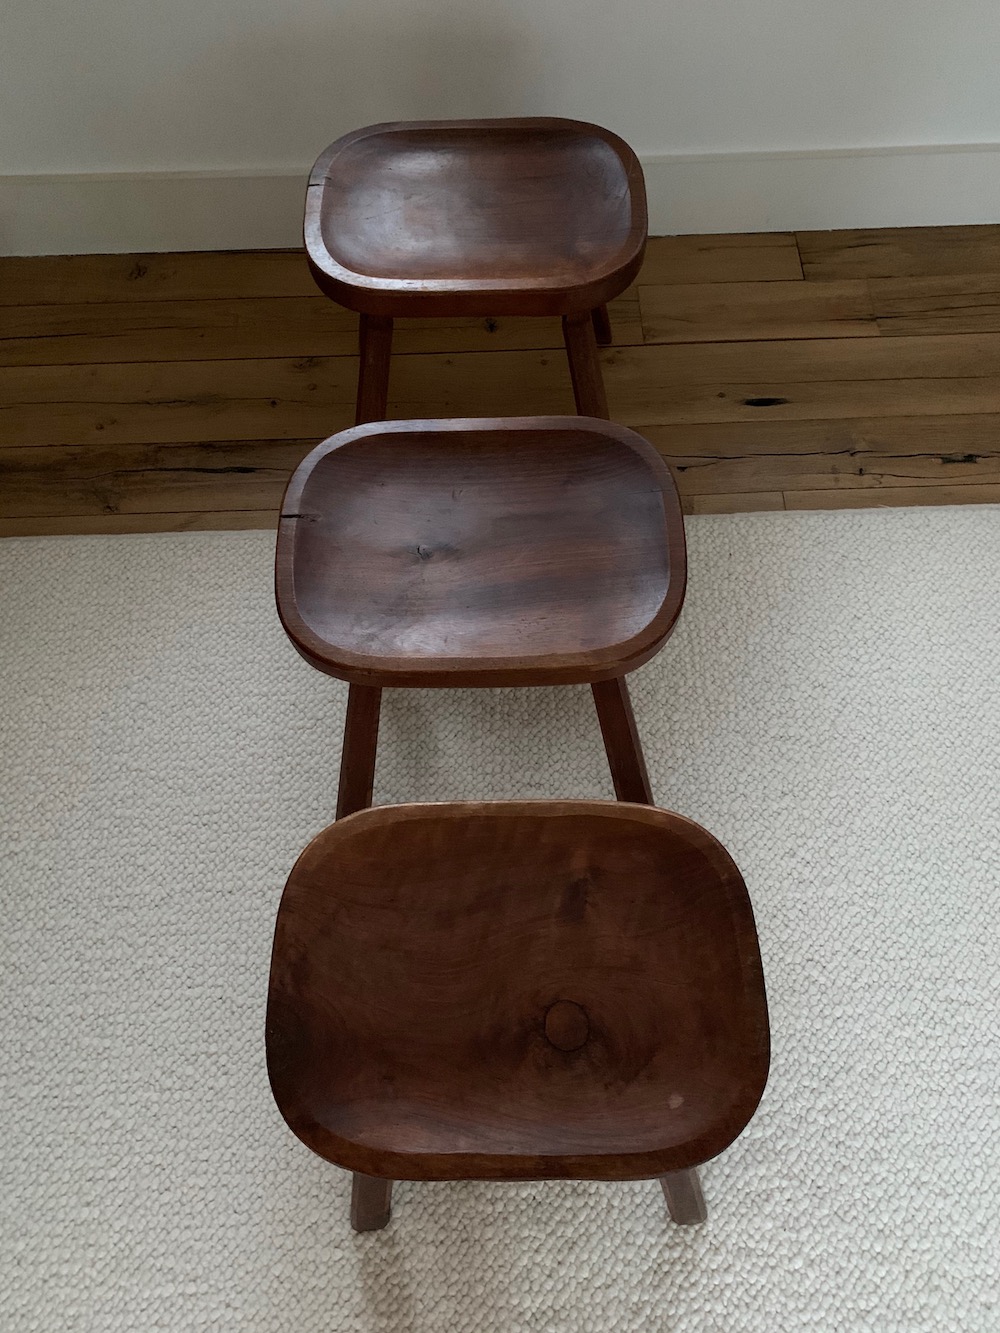 old stools, tabourets, tabouret vintage, tabouret campagnard, tabouret brutaliste, brutalist, vintage stools, vintage stool, art populaire, kinfolk, tabouret tripode, charming stool, beau tabouret, tabouret bois, tabouret ancien, nicechairs.be, nice chairs